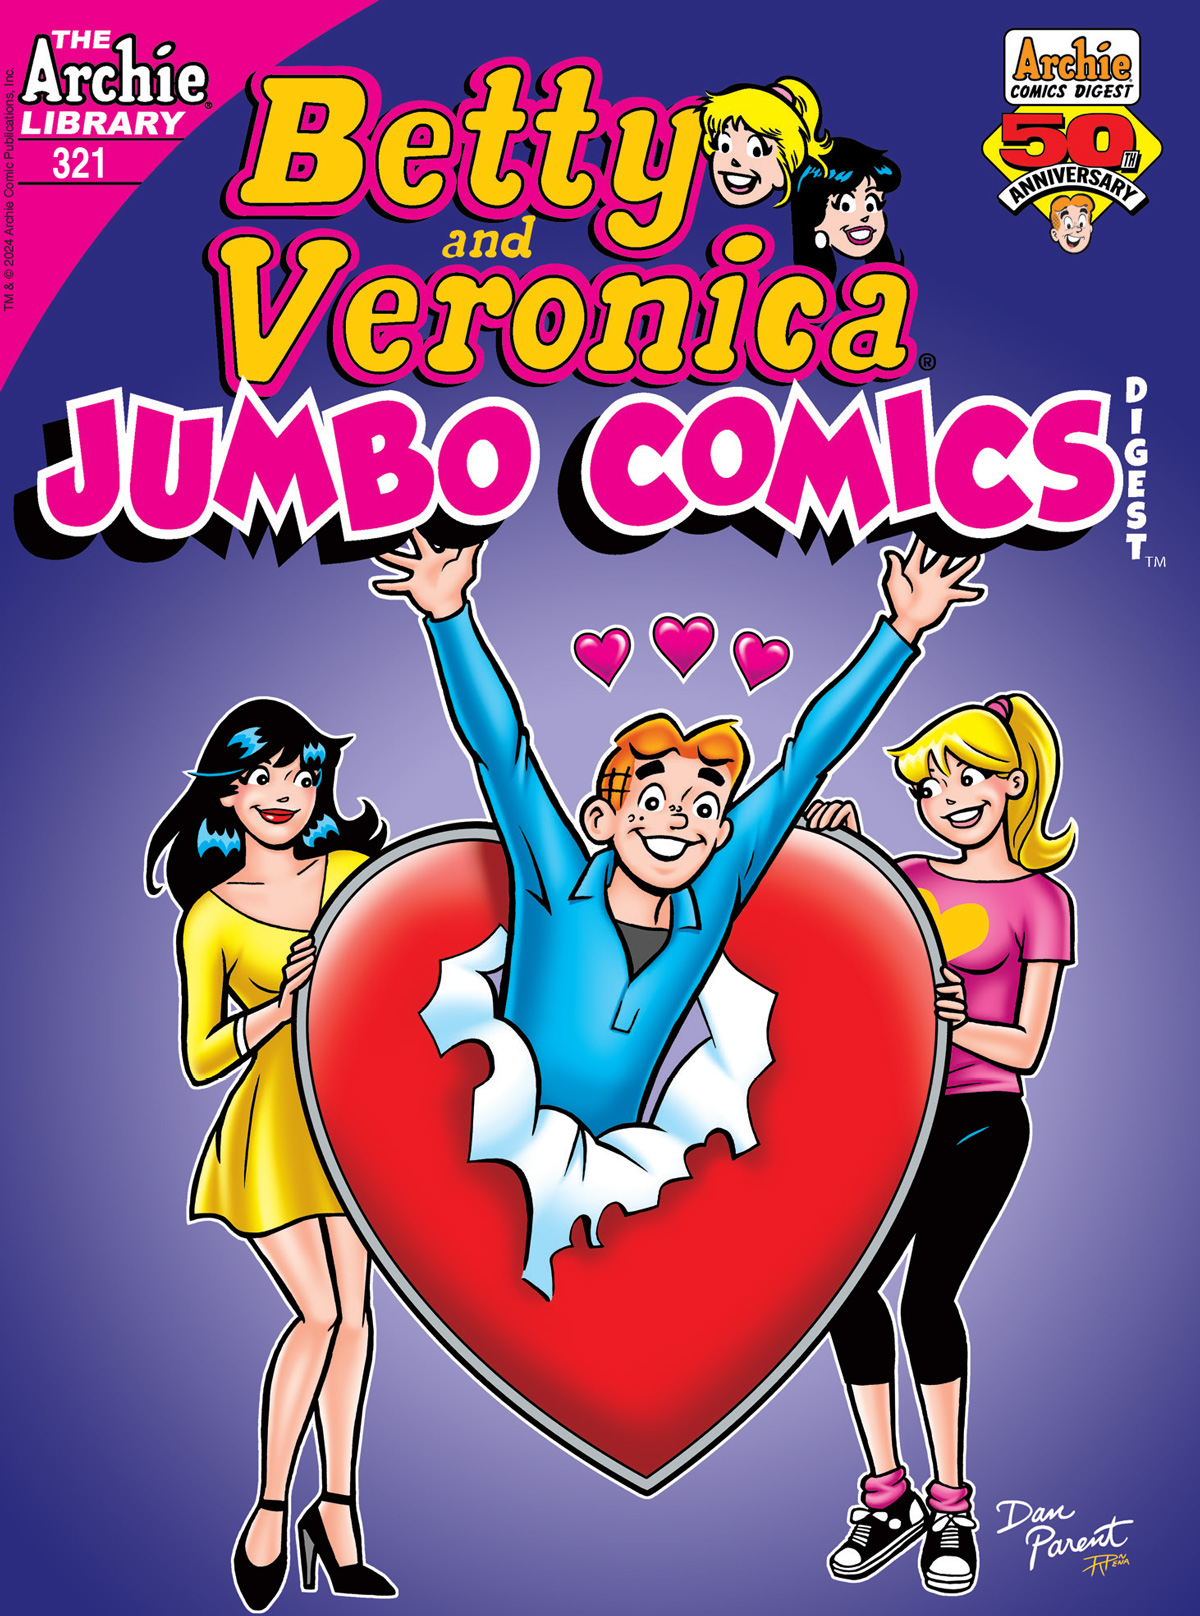 Archie jumps out of a giant heart as Betty and Veronica look on smiling. Archie has hearts floating around his head.